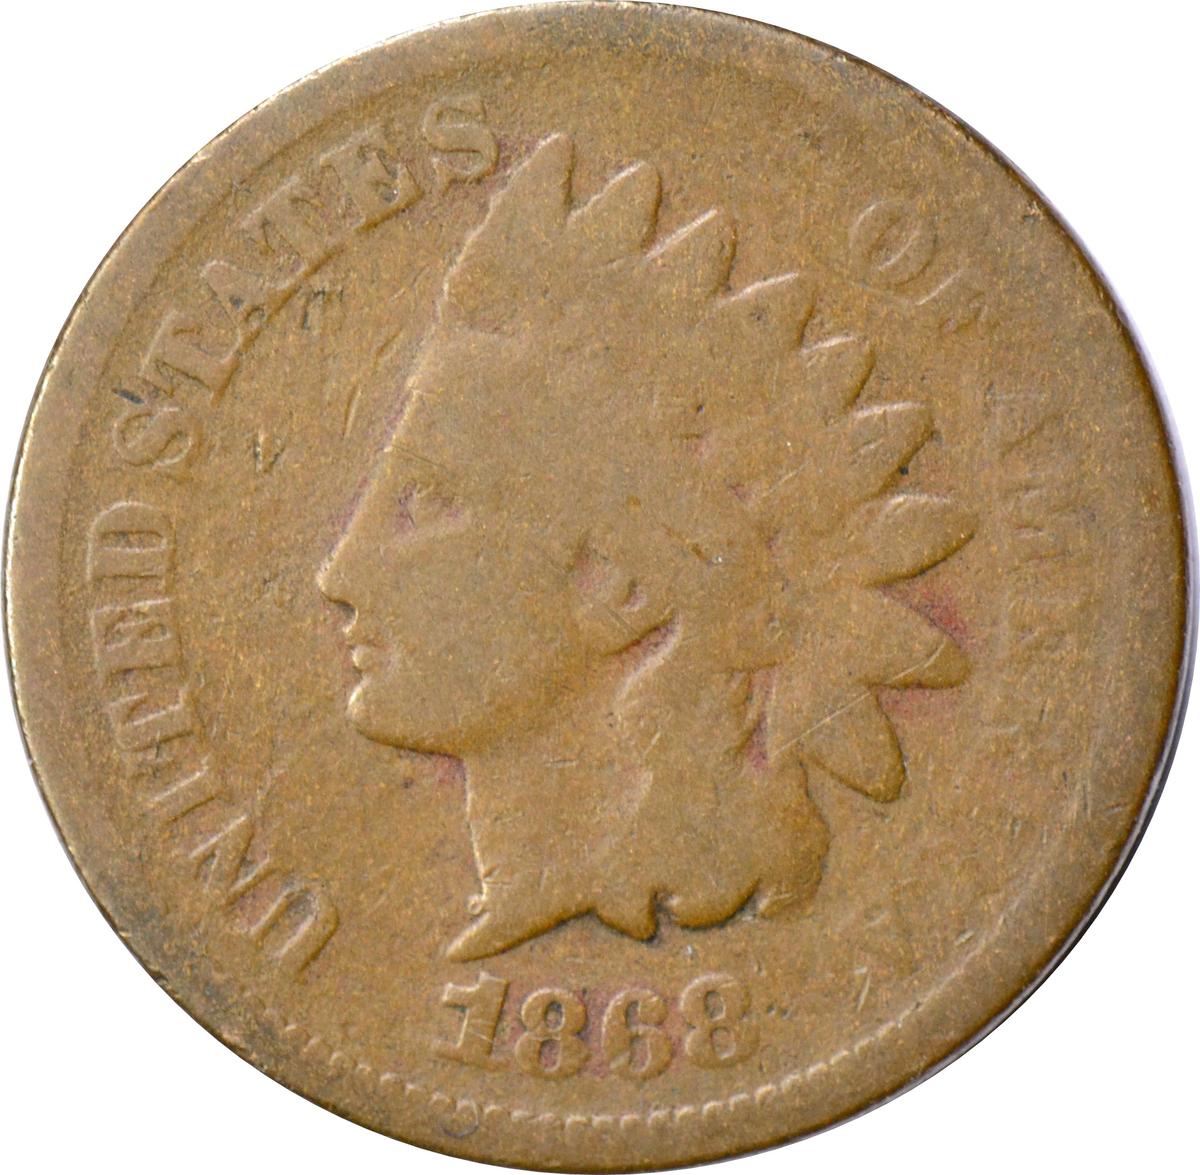 1868 INDIAN CENT